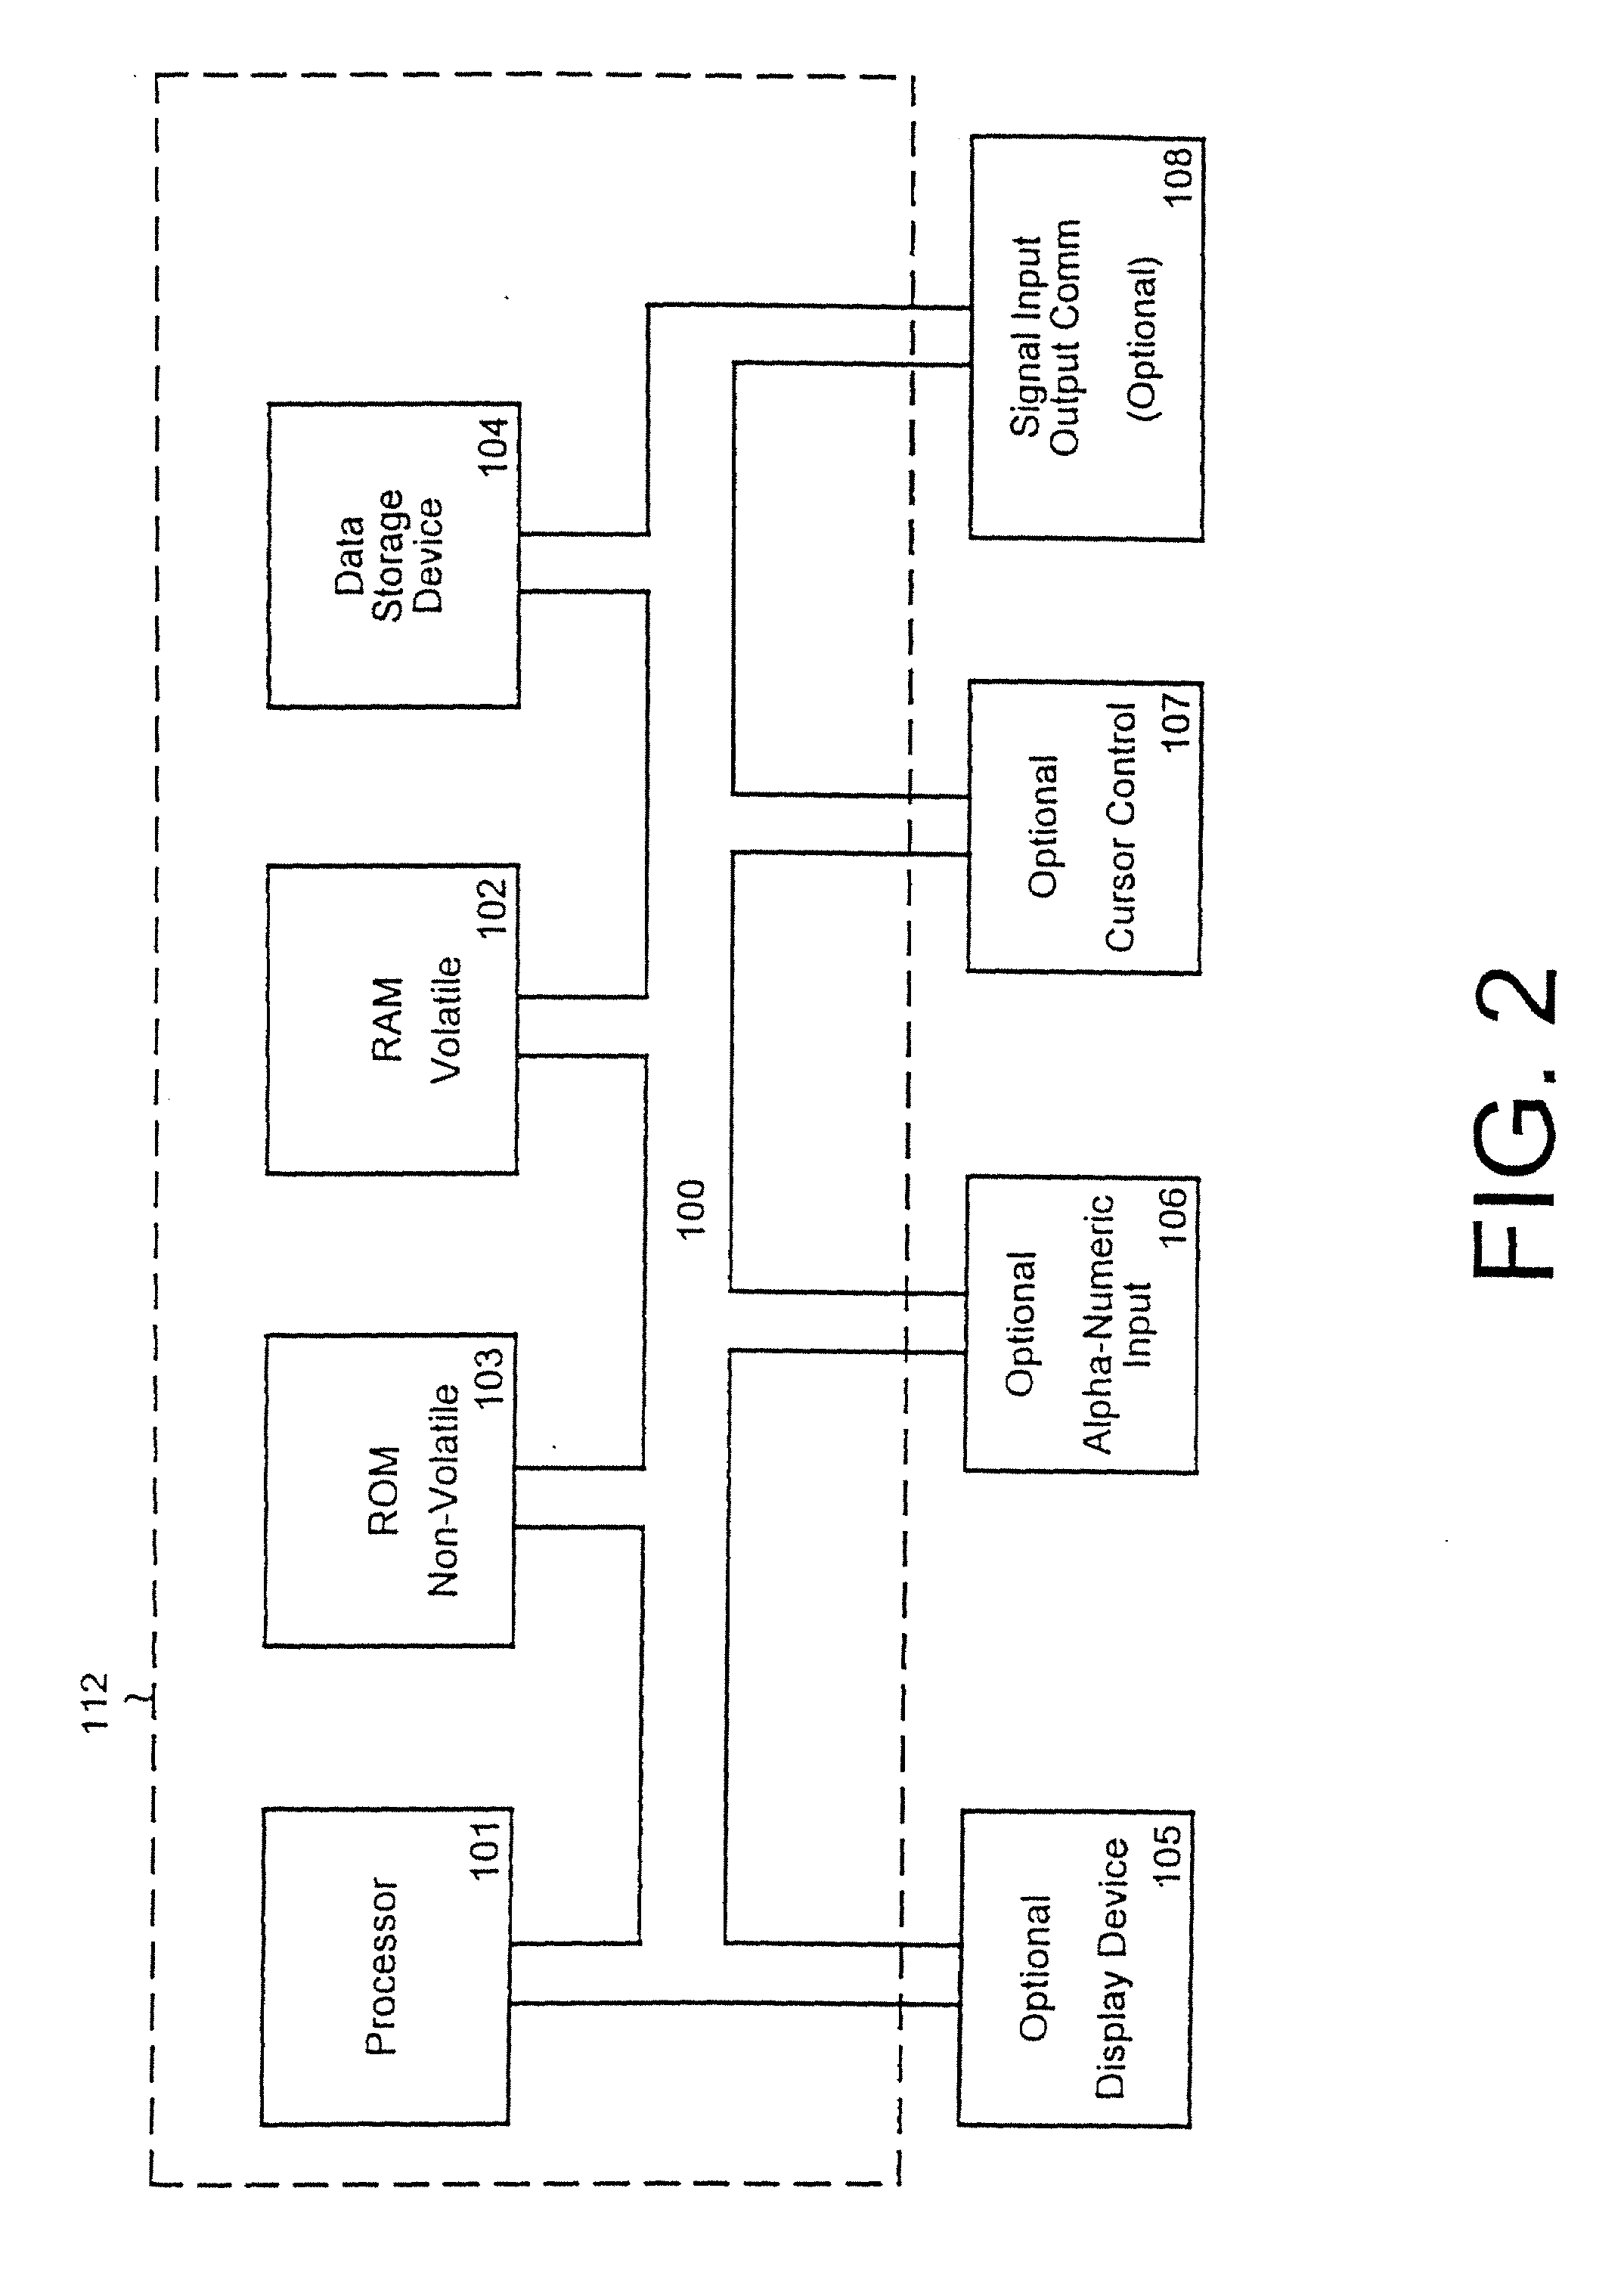 Method and system for generating an atpg model of a memory from behavioral descriptions